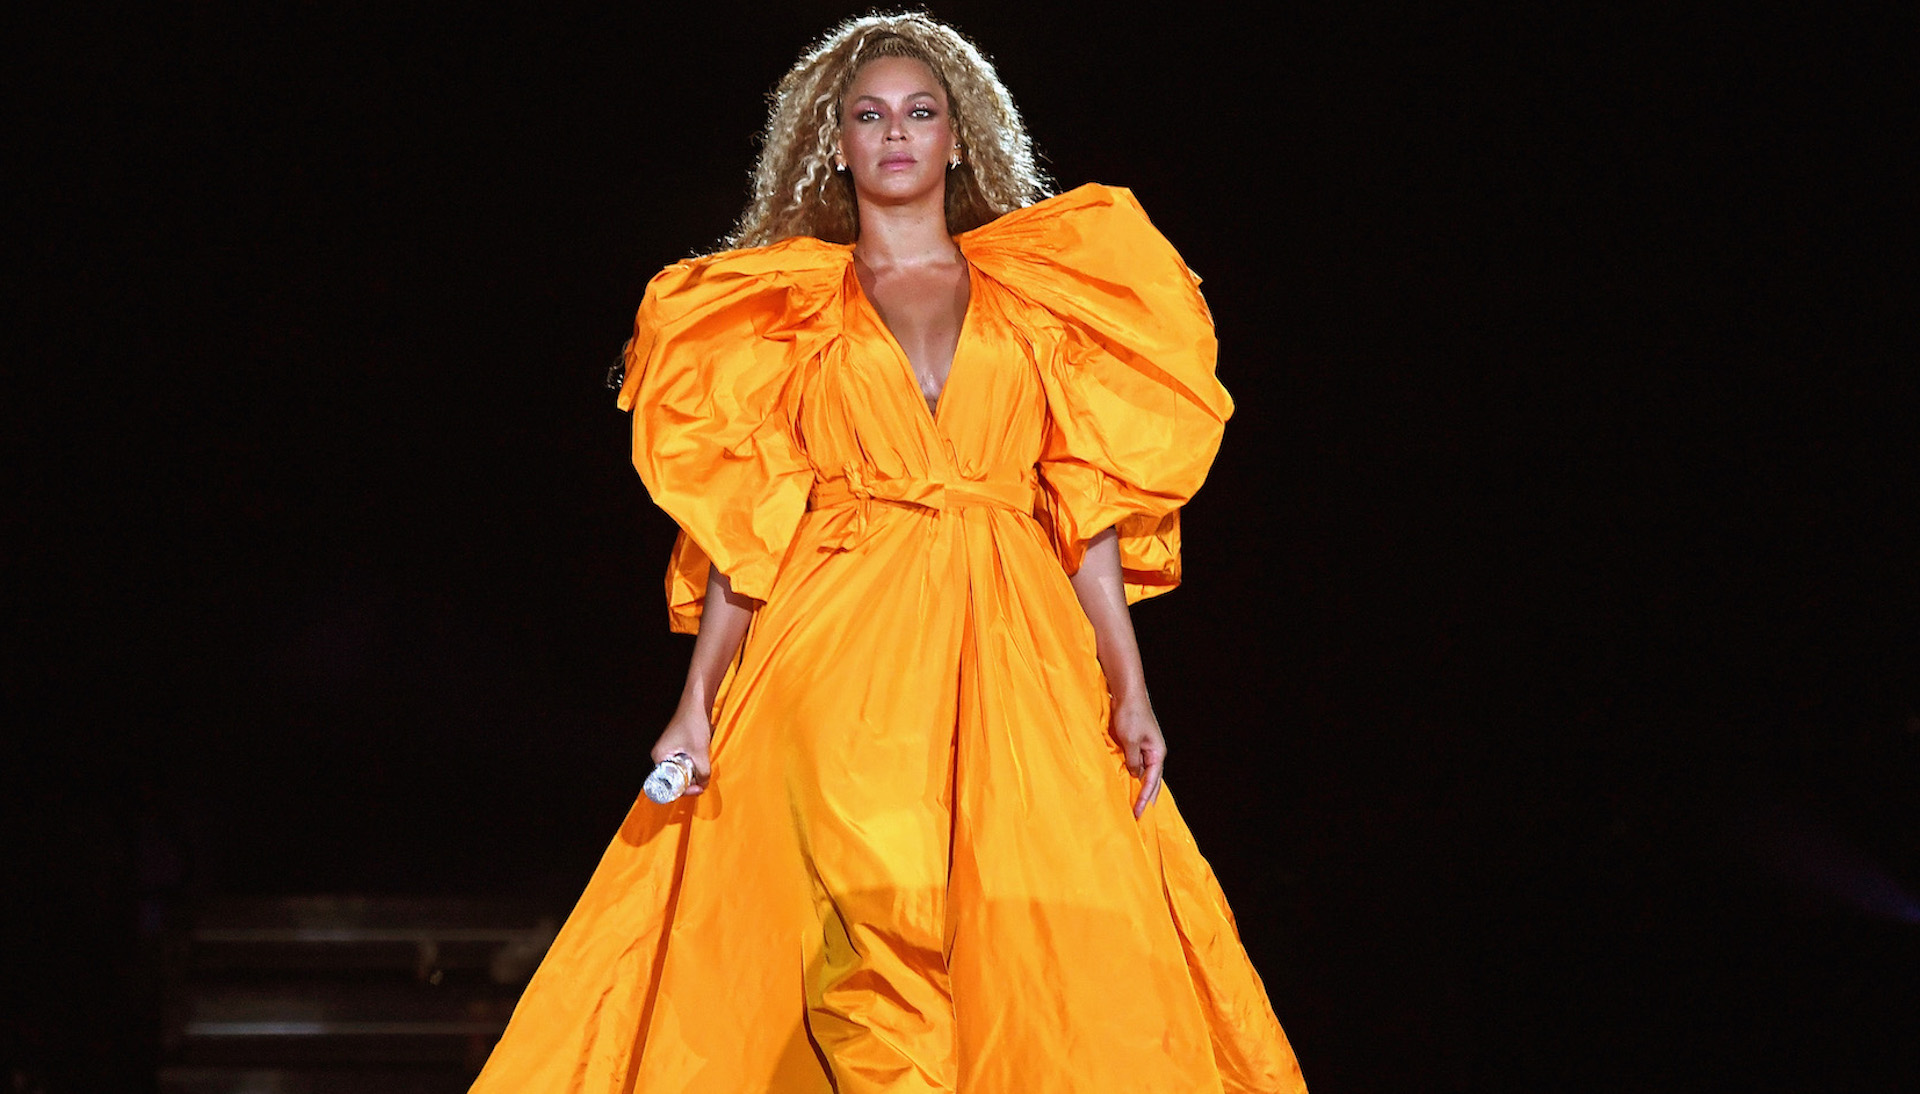 Beyonce performs at her On The Run Tour